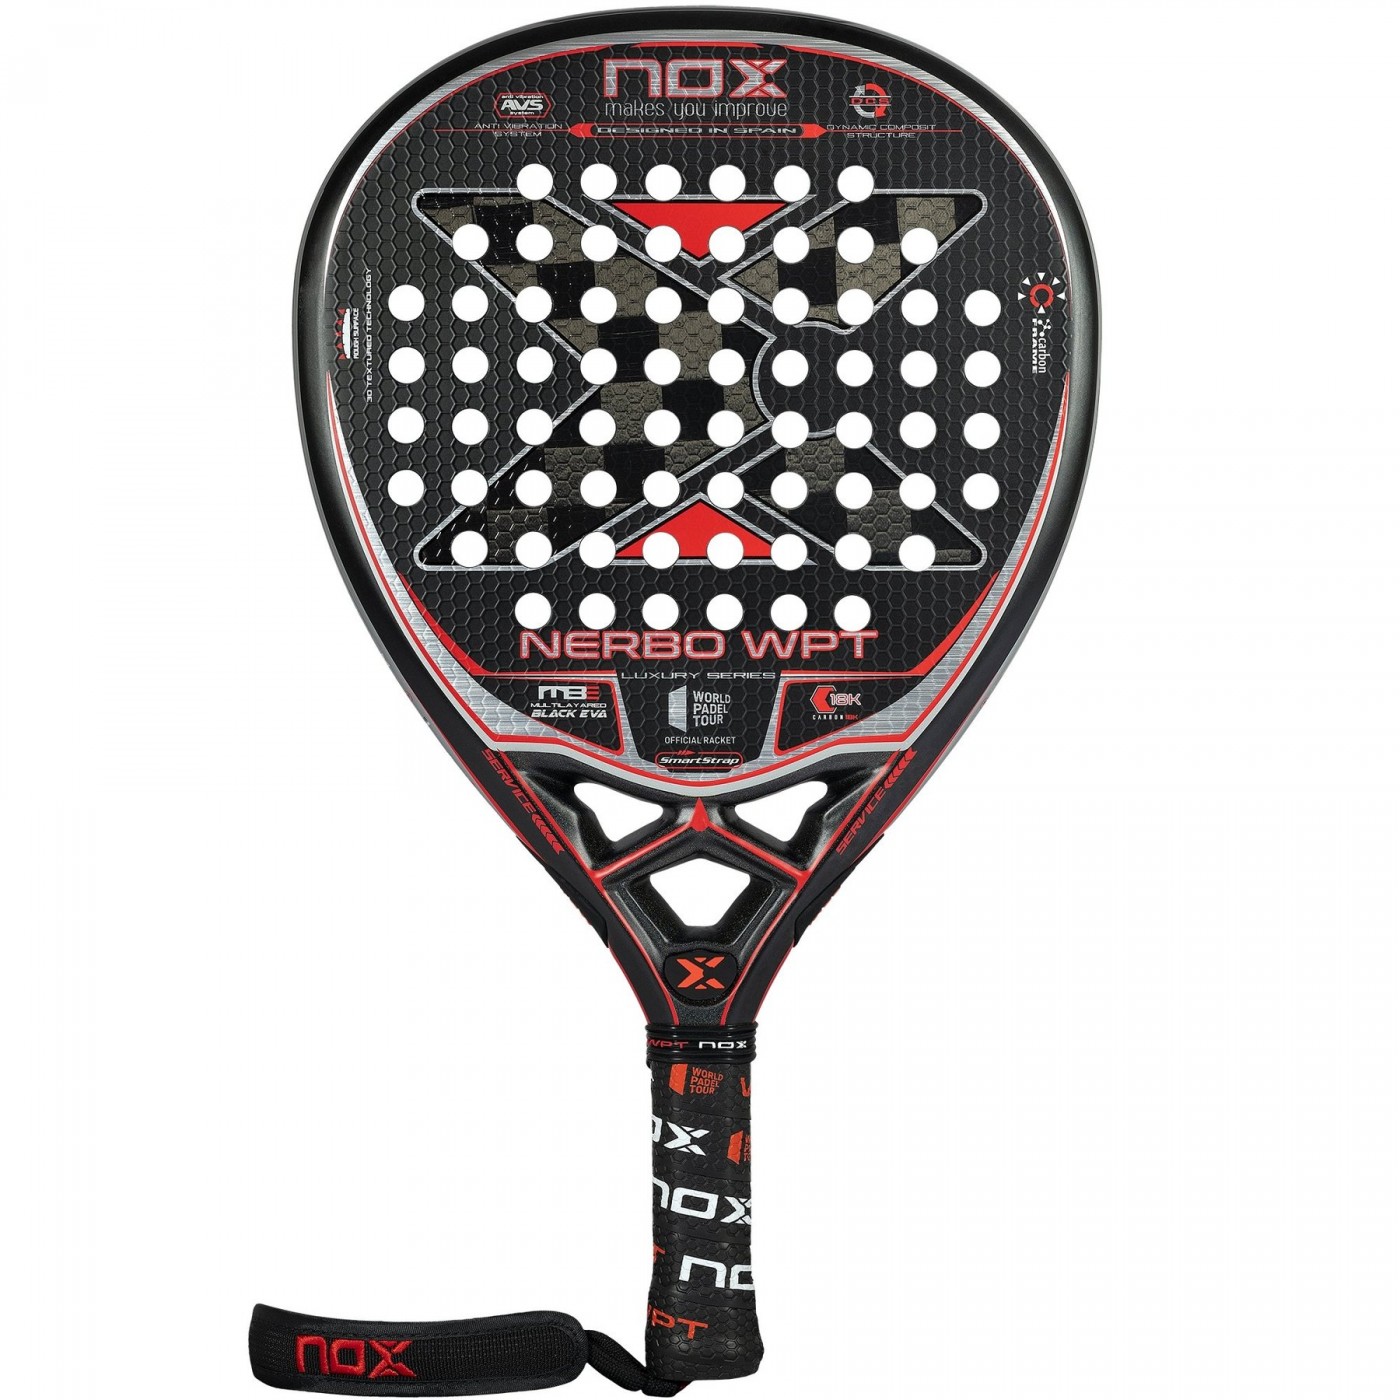 Nerbo World Padel Tour Official Racket 2022